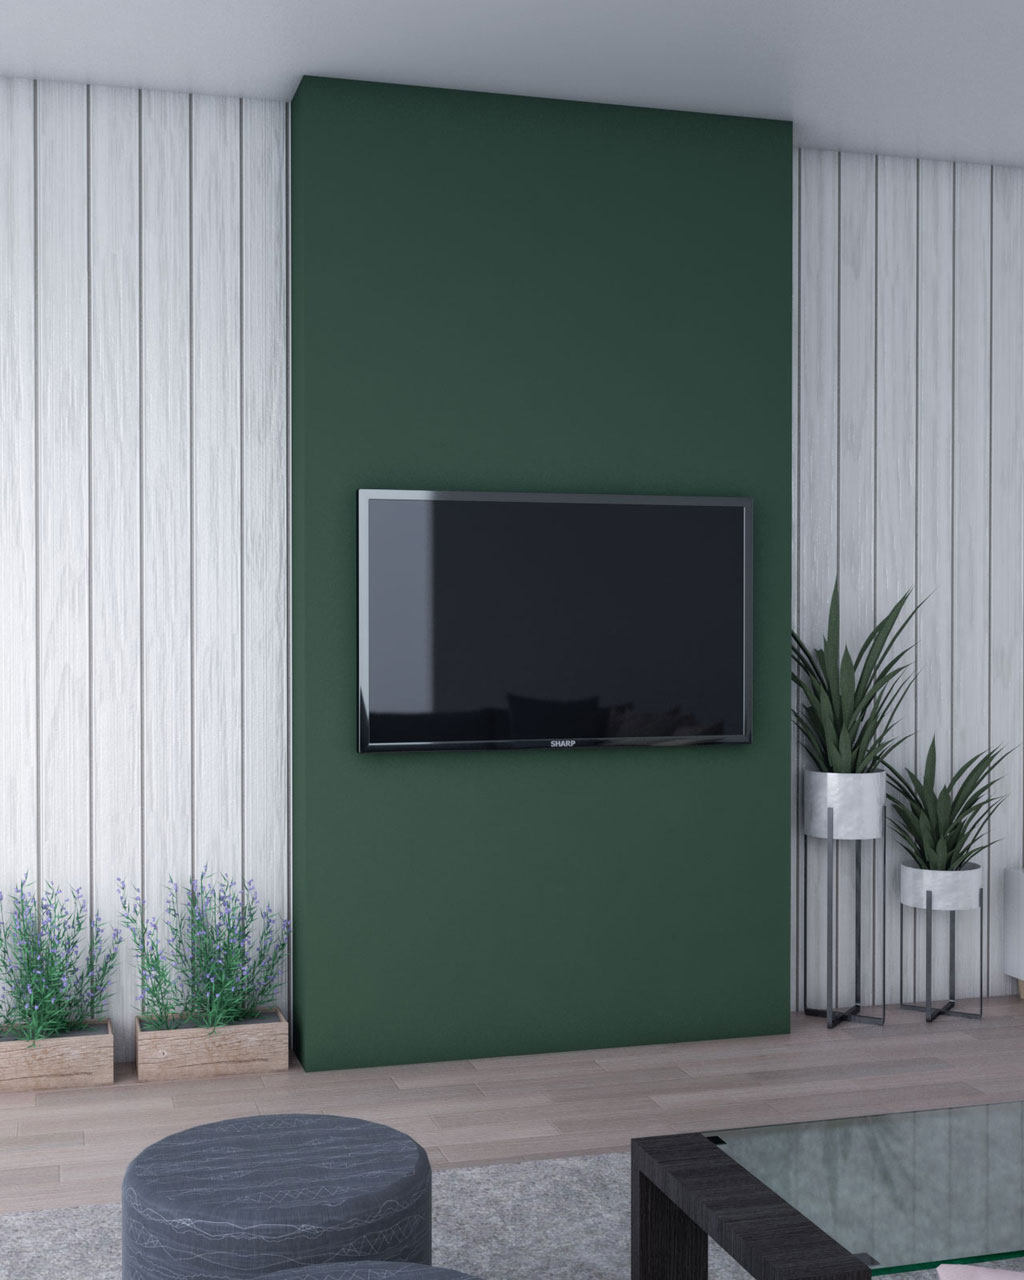 10 Gorgeous Accent Wall Ideas Behind TV for Your Living Room 